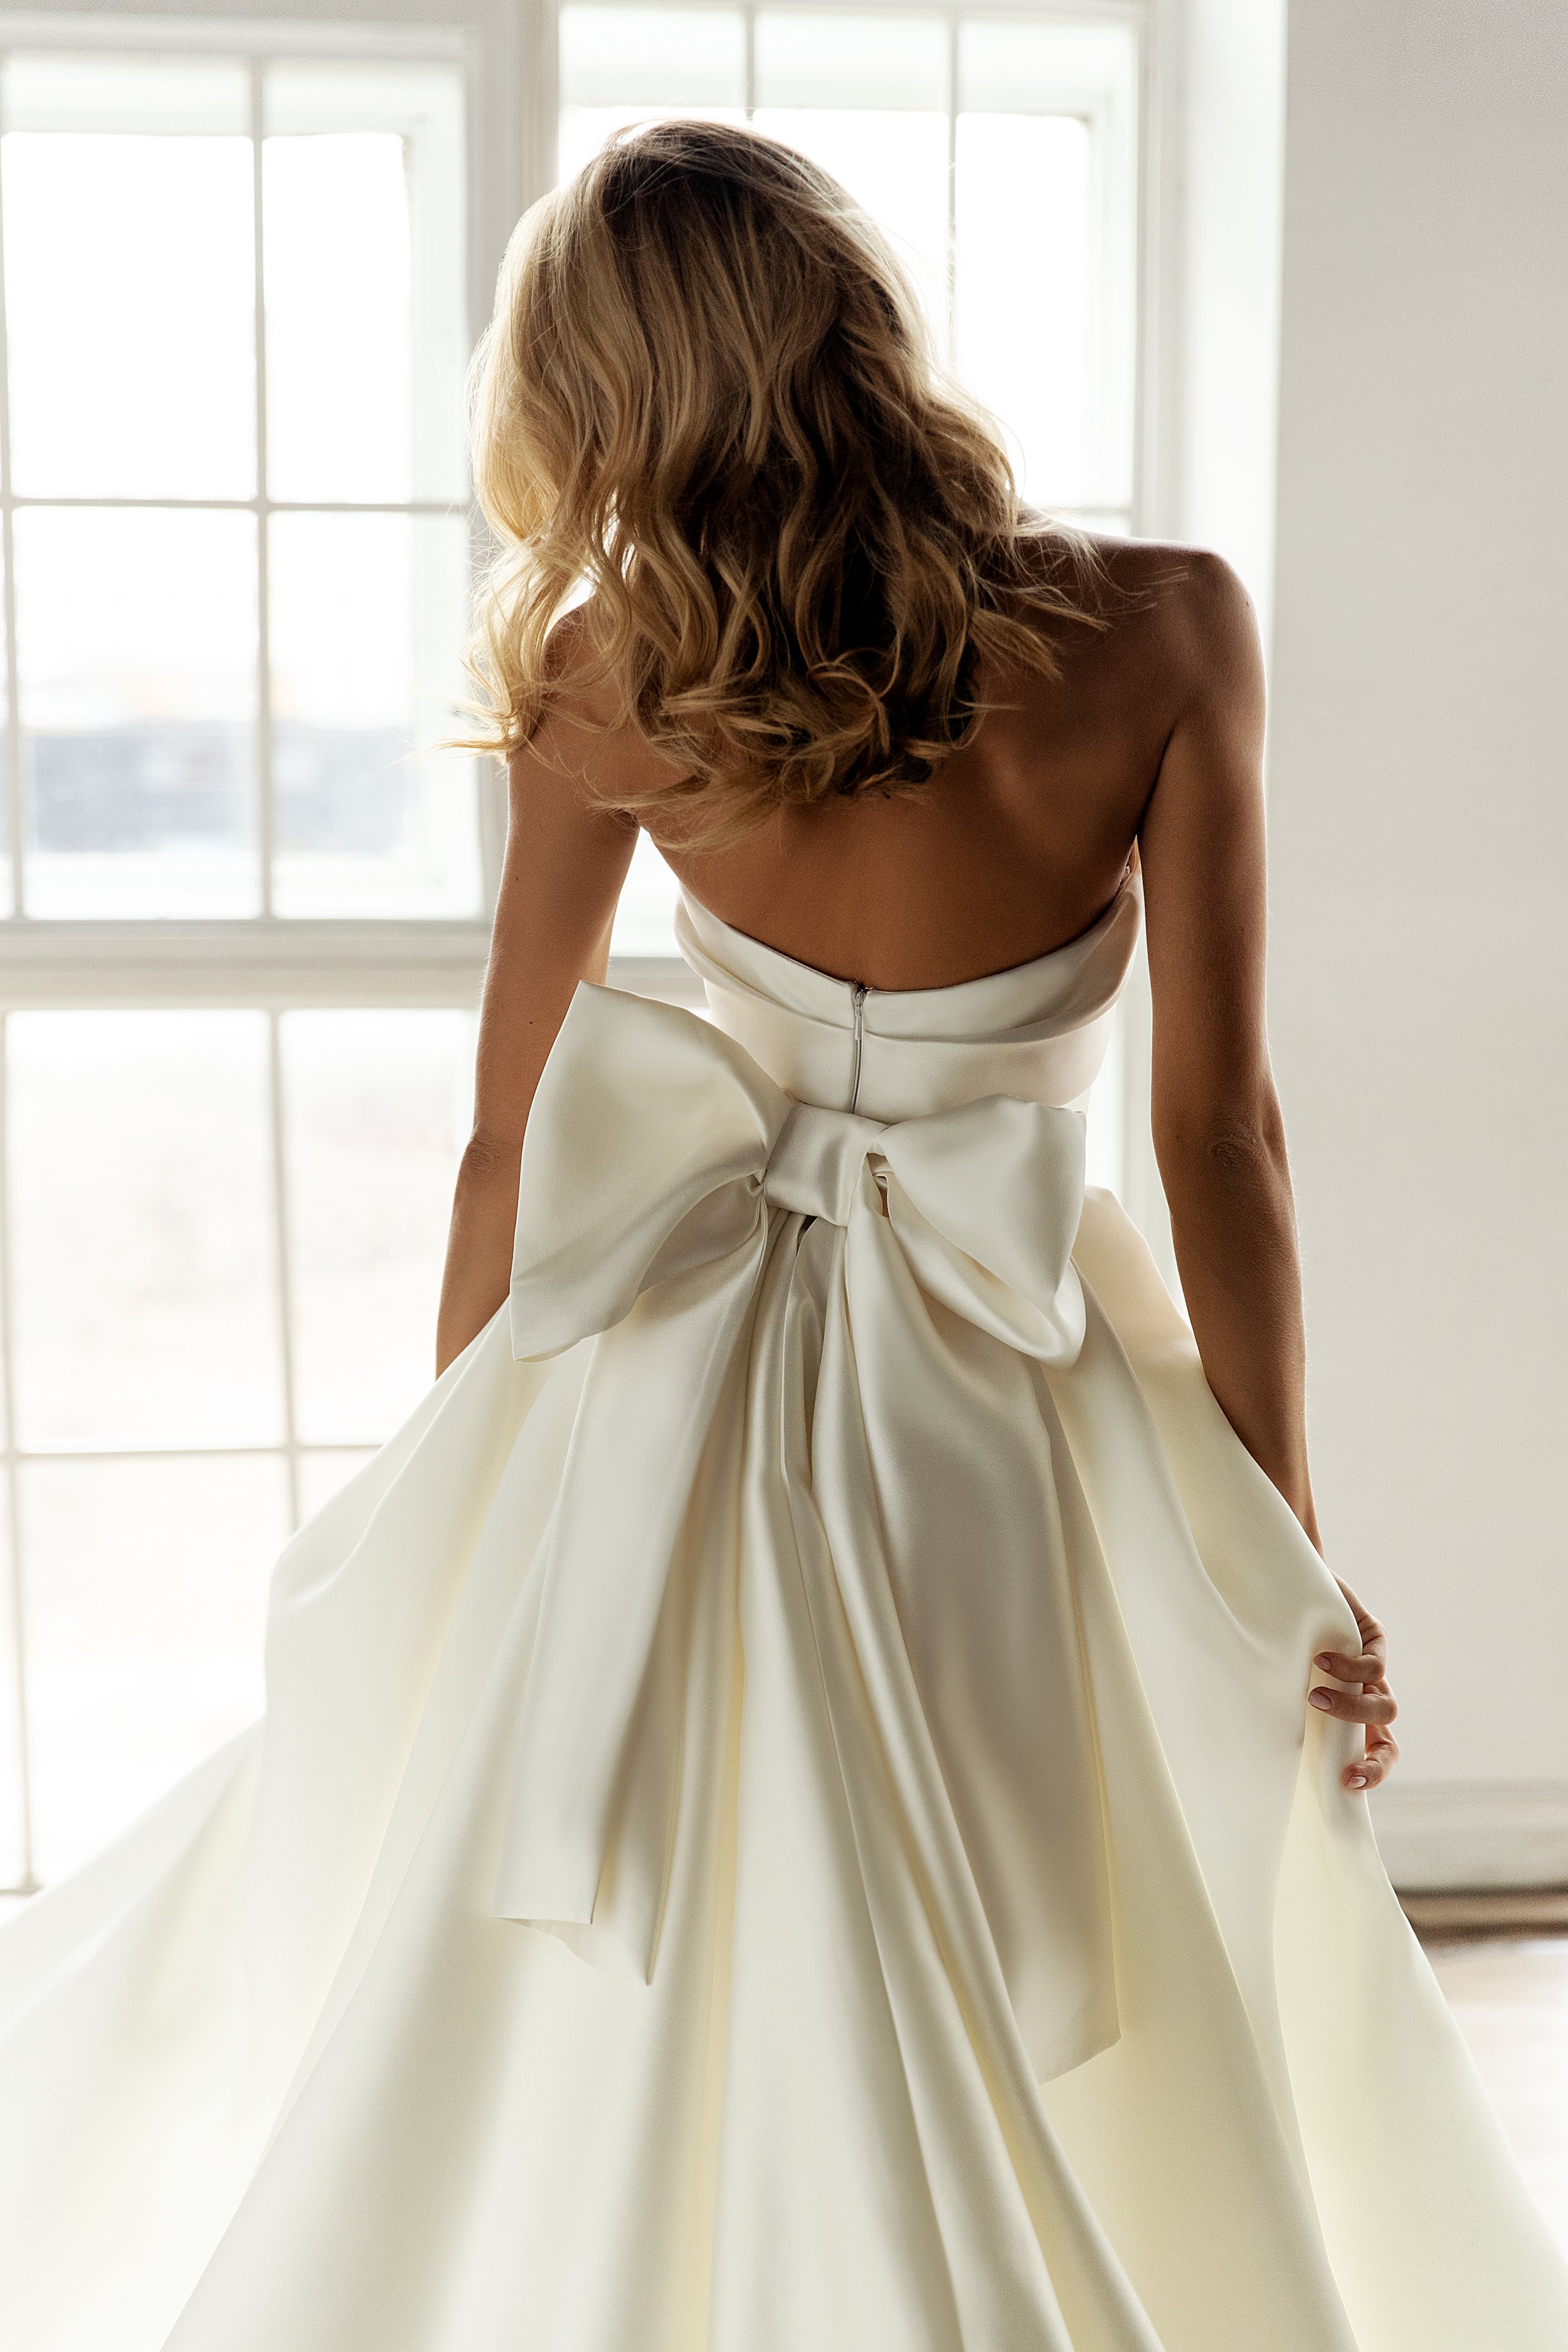 Wedding Dresses Manchester | Up to 80% Discount | Wedding Dresses